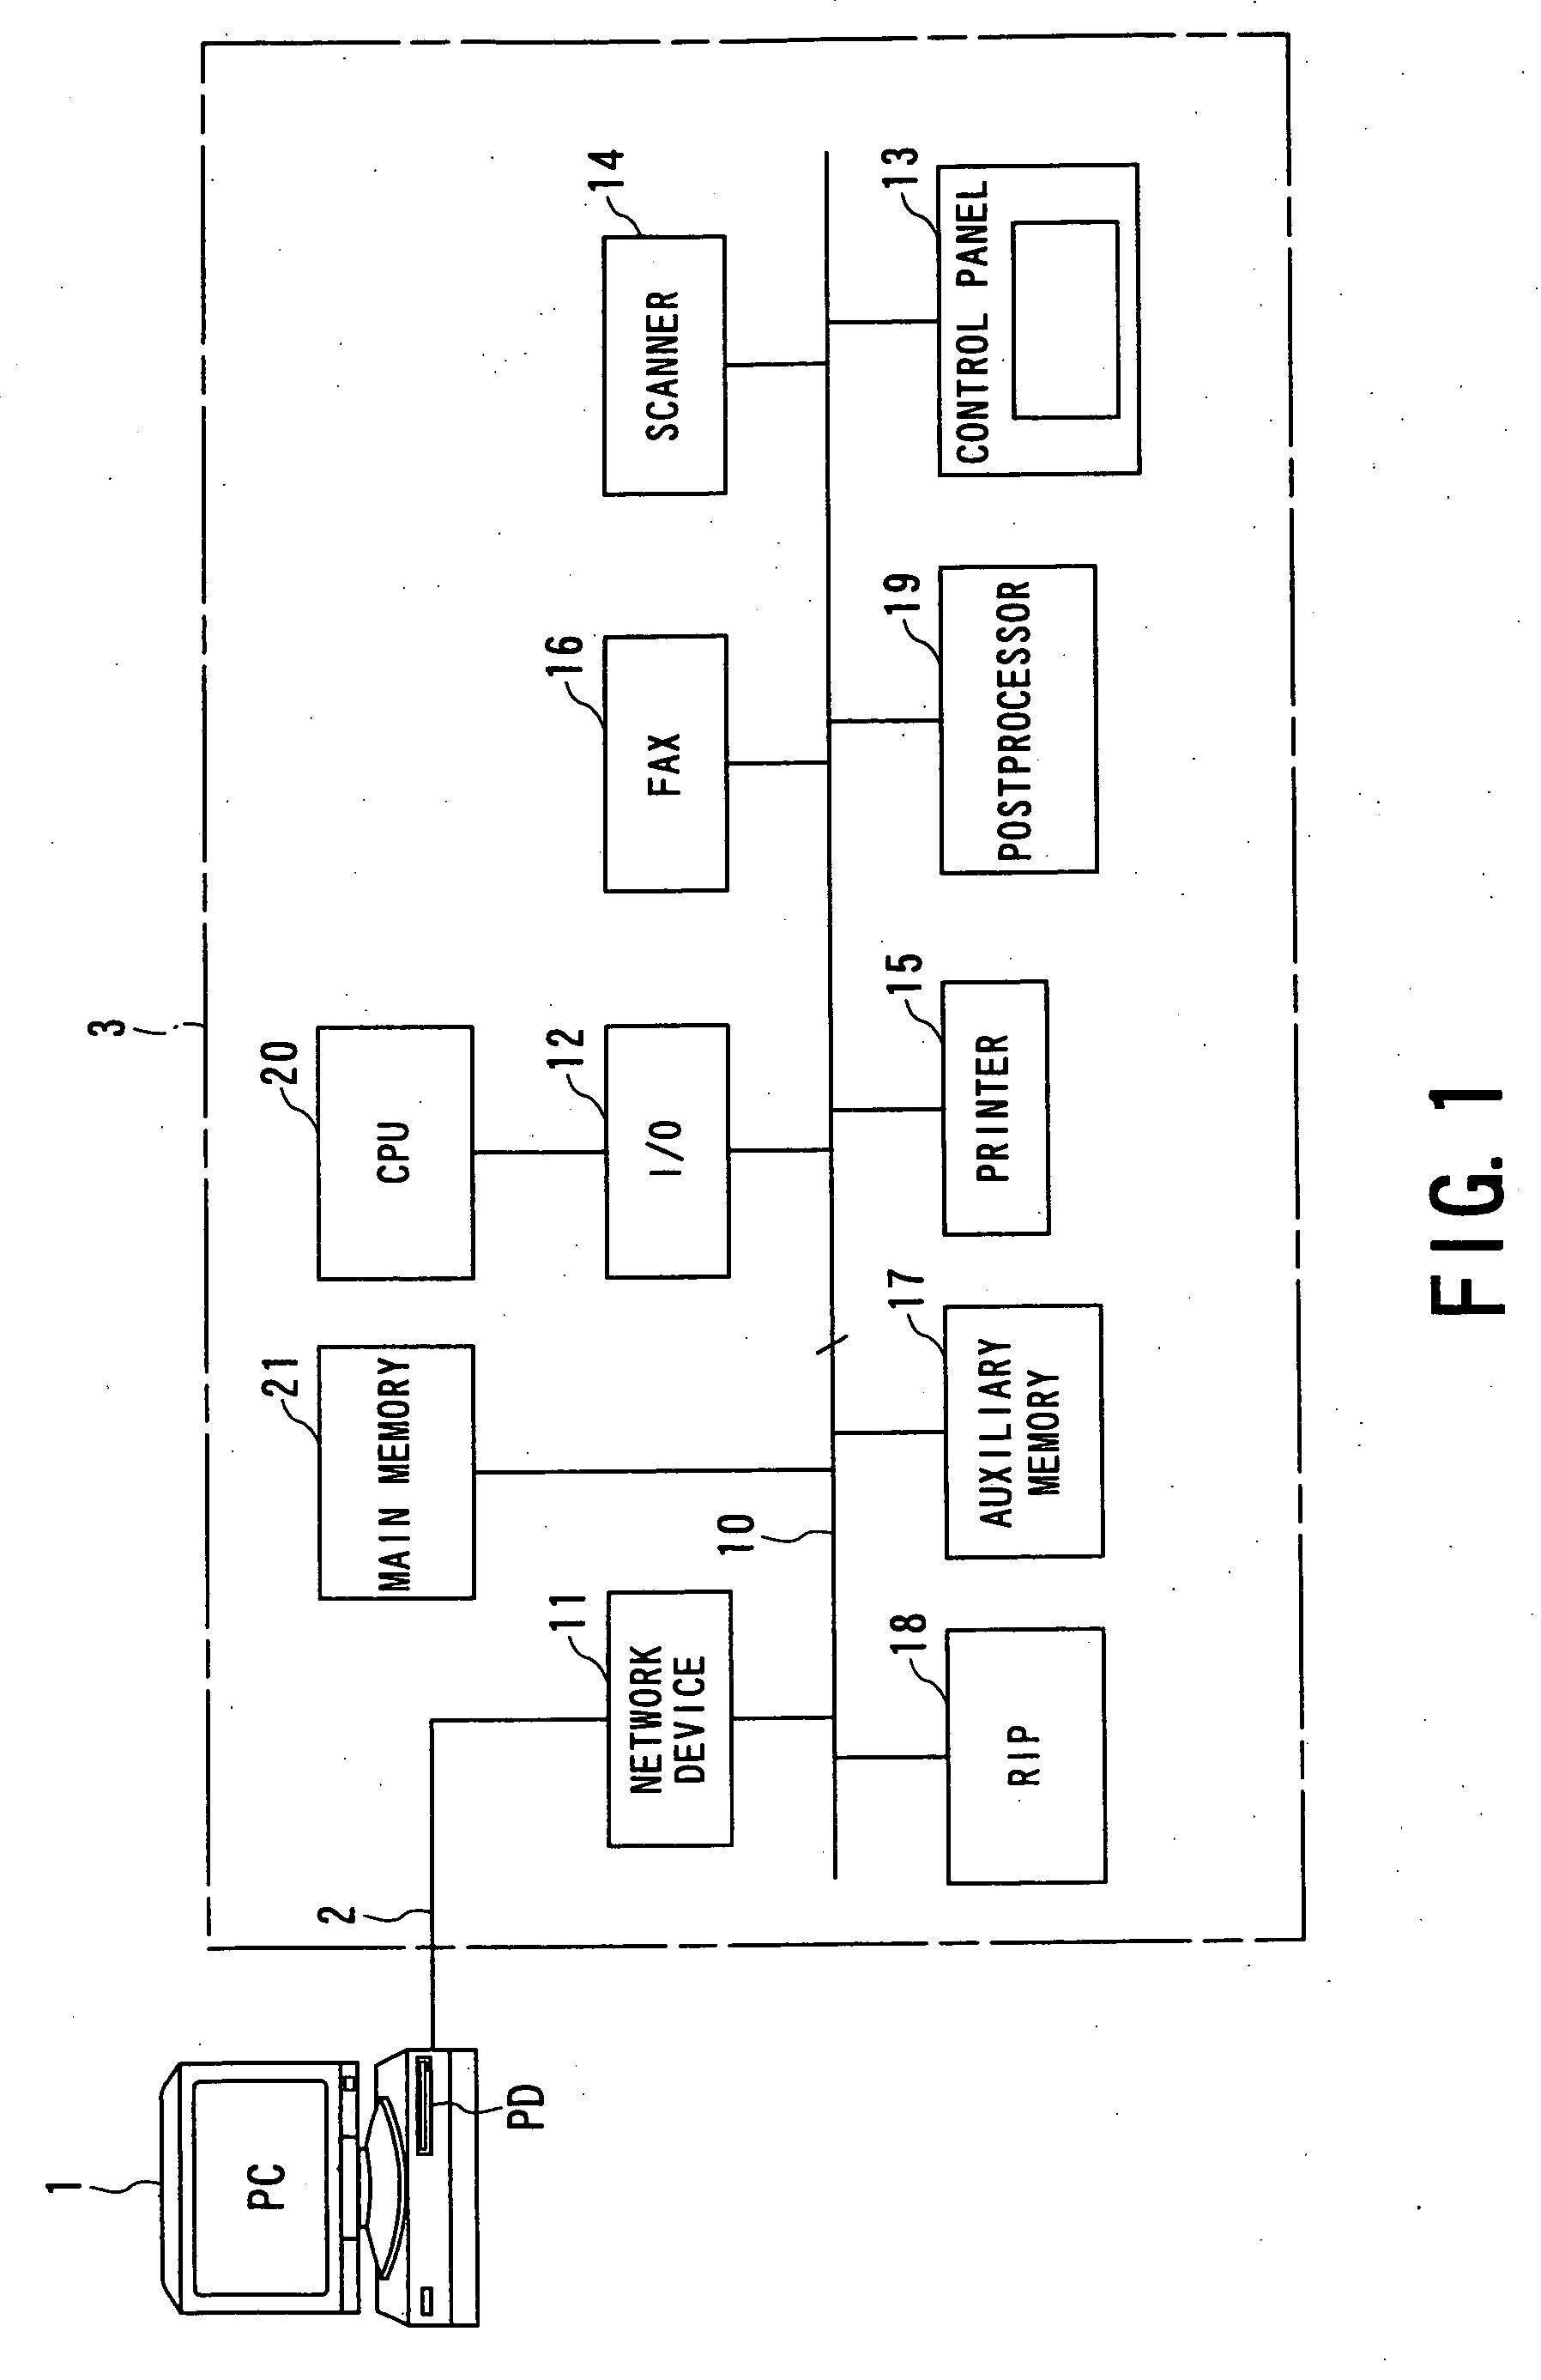 Method and apparatus for producing images by using finely optimized image processing parameters